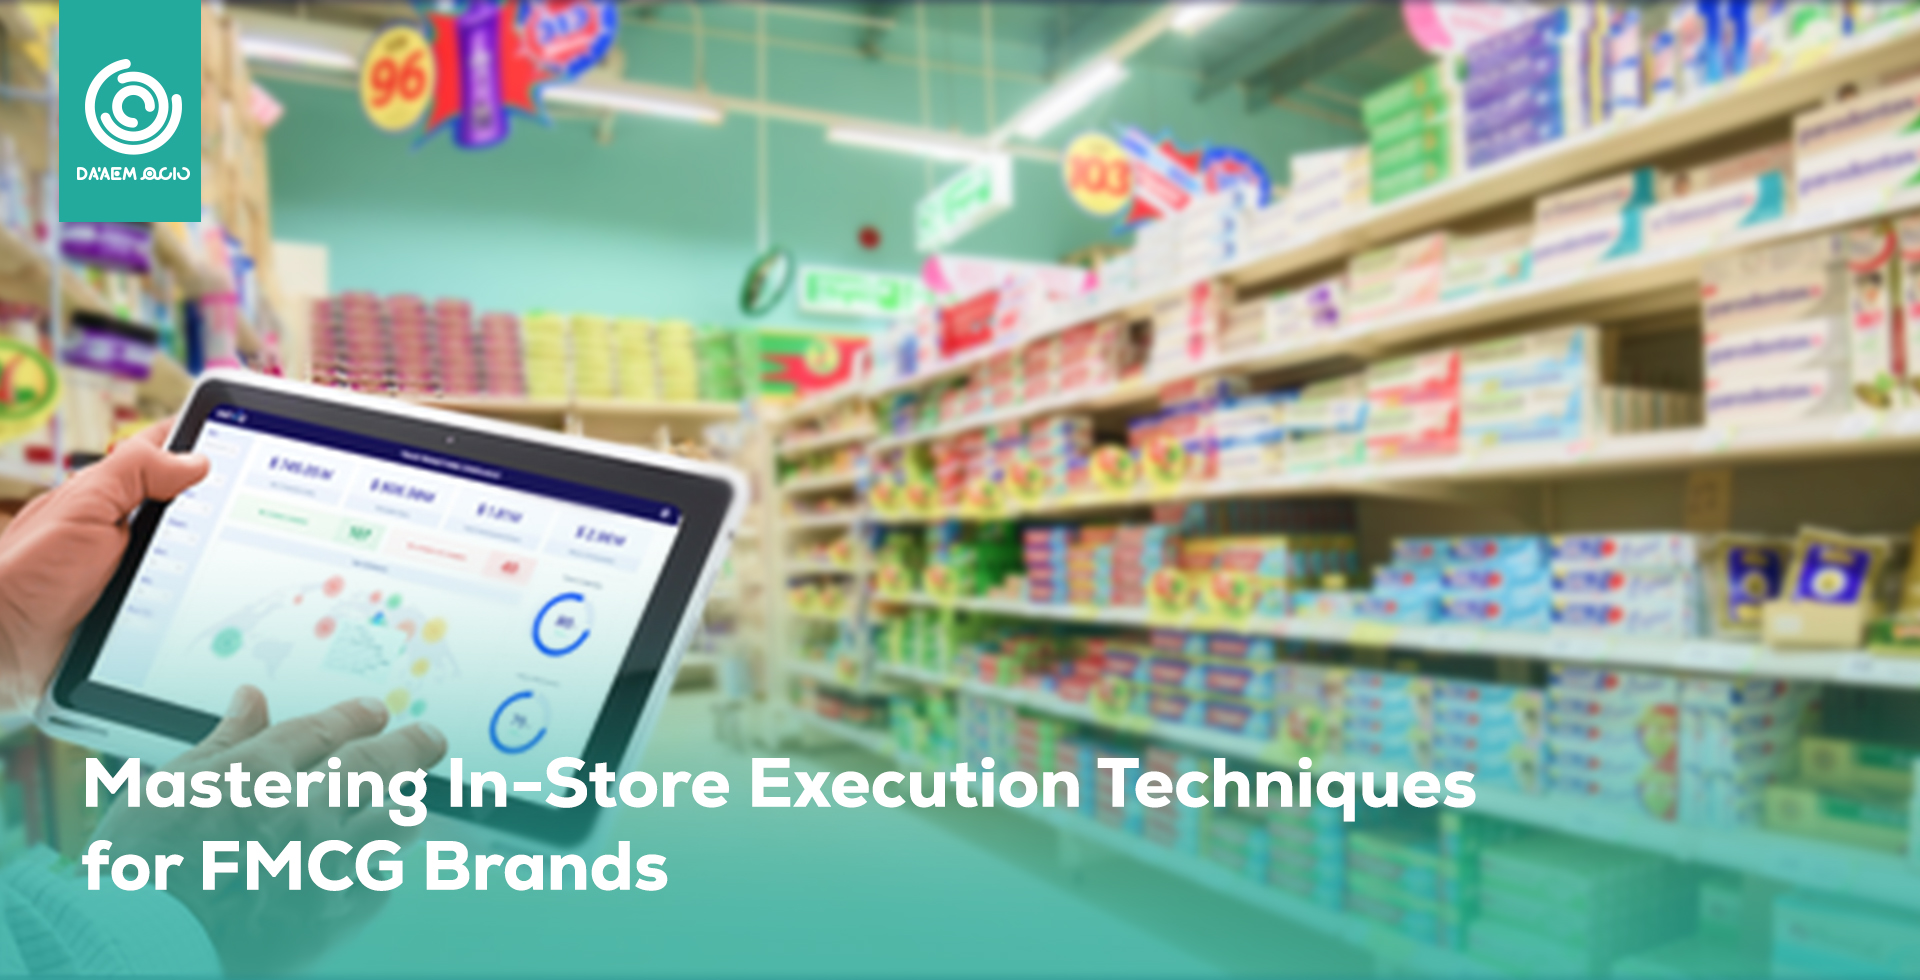 In-Store Execution Techniques